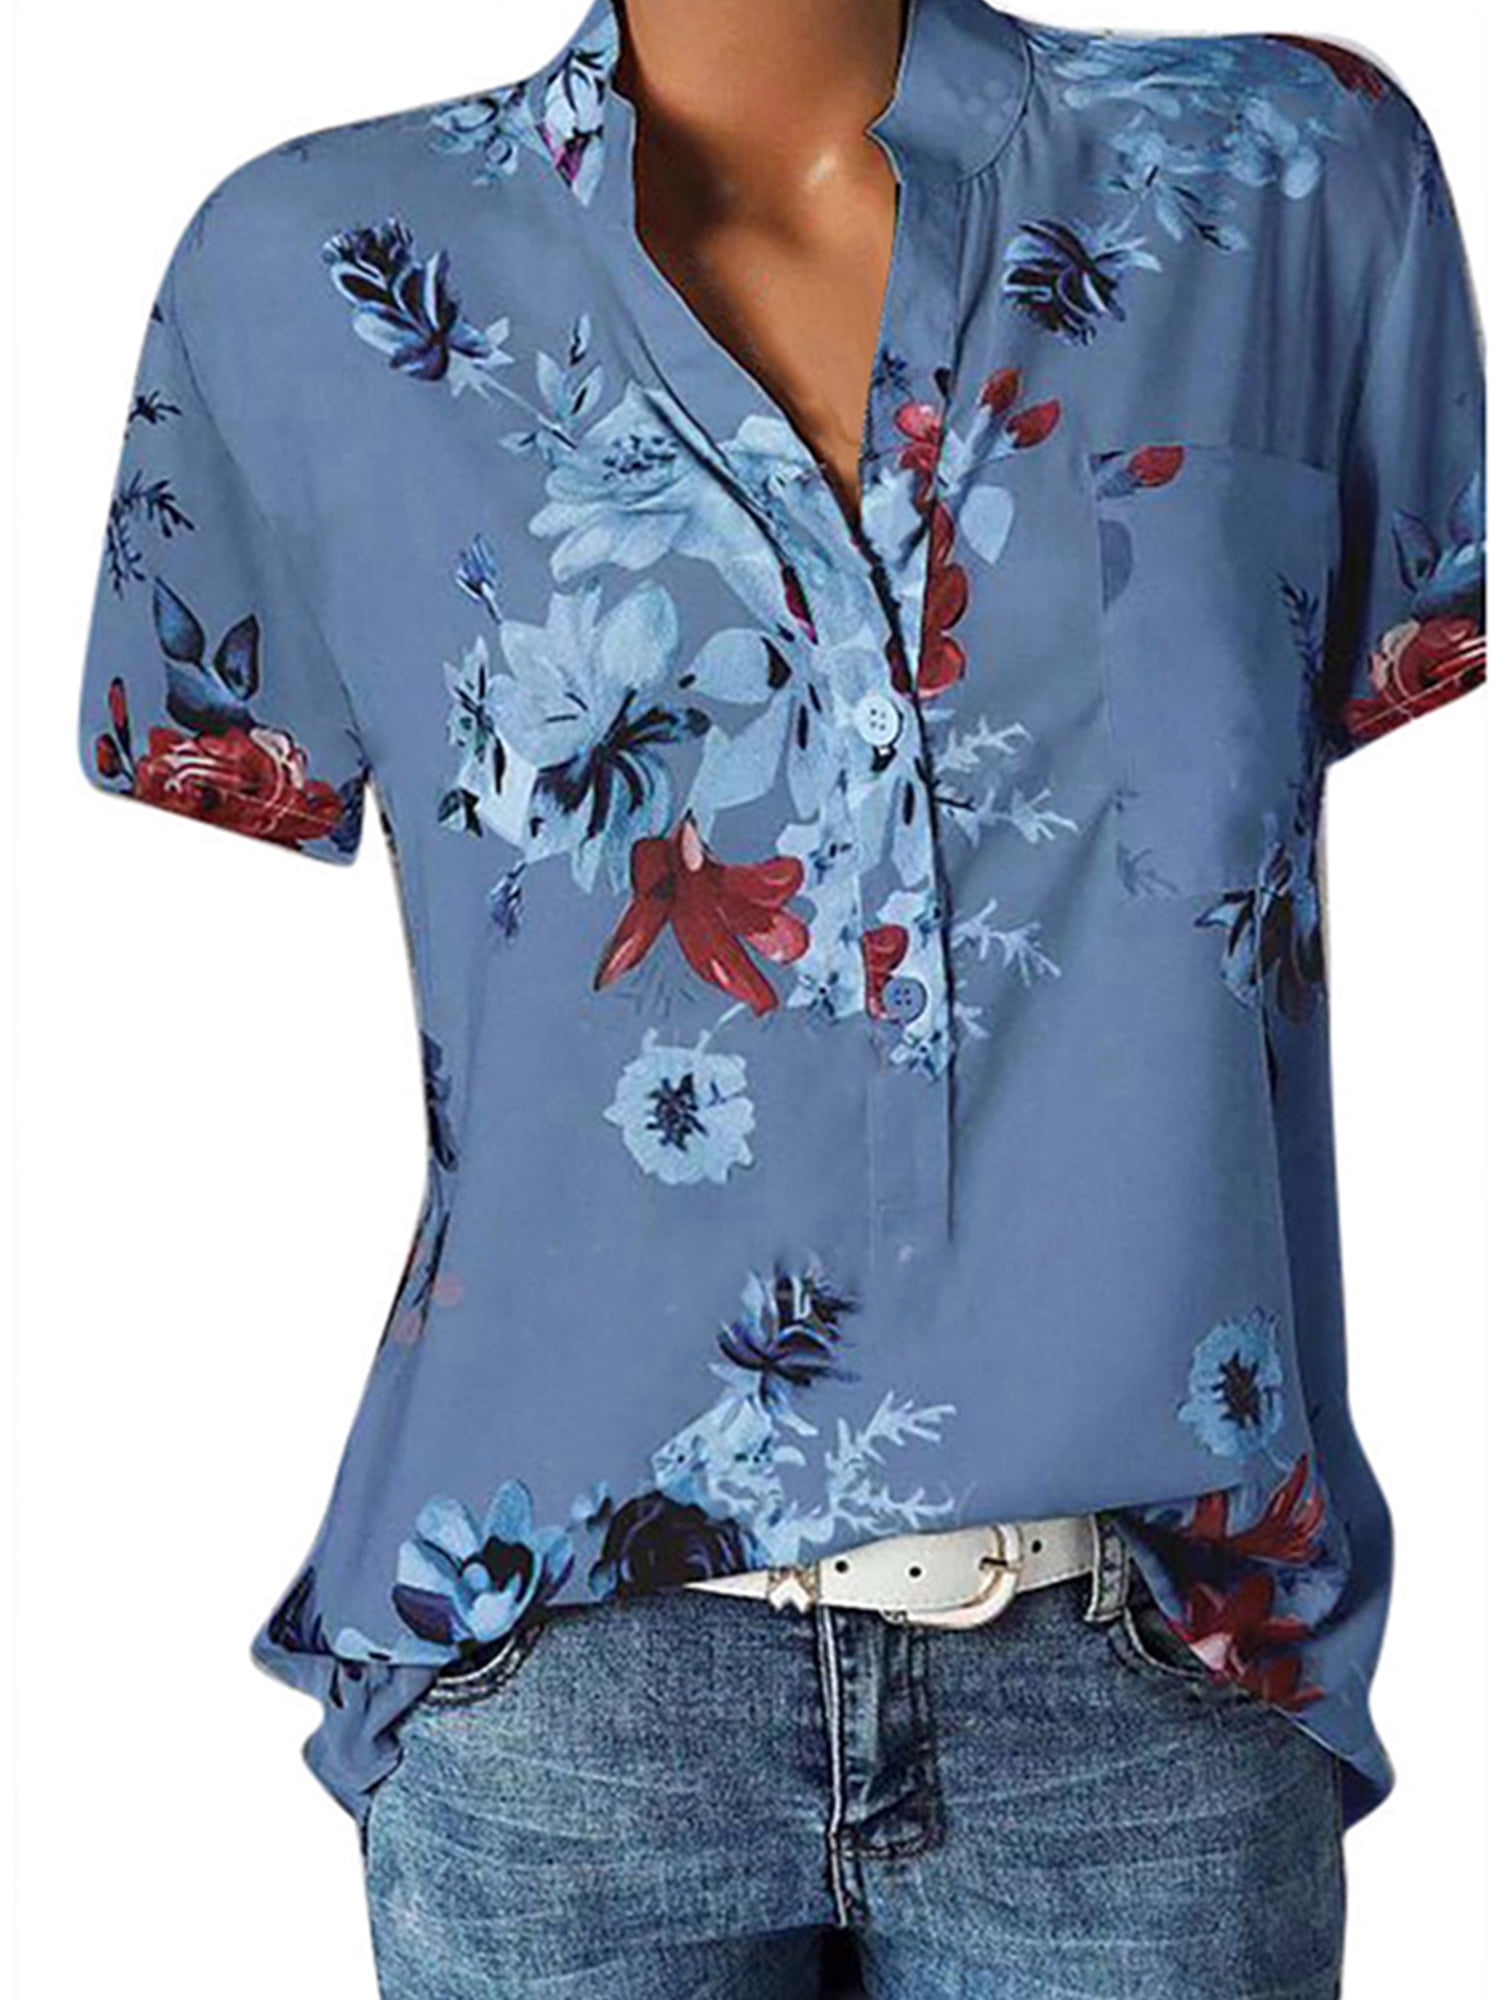 Women's Plus Size V Neck Floral Tops Short Sleeve Summer Loose T-shirts